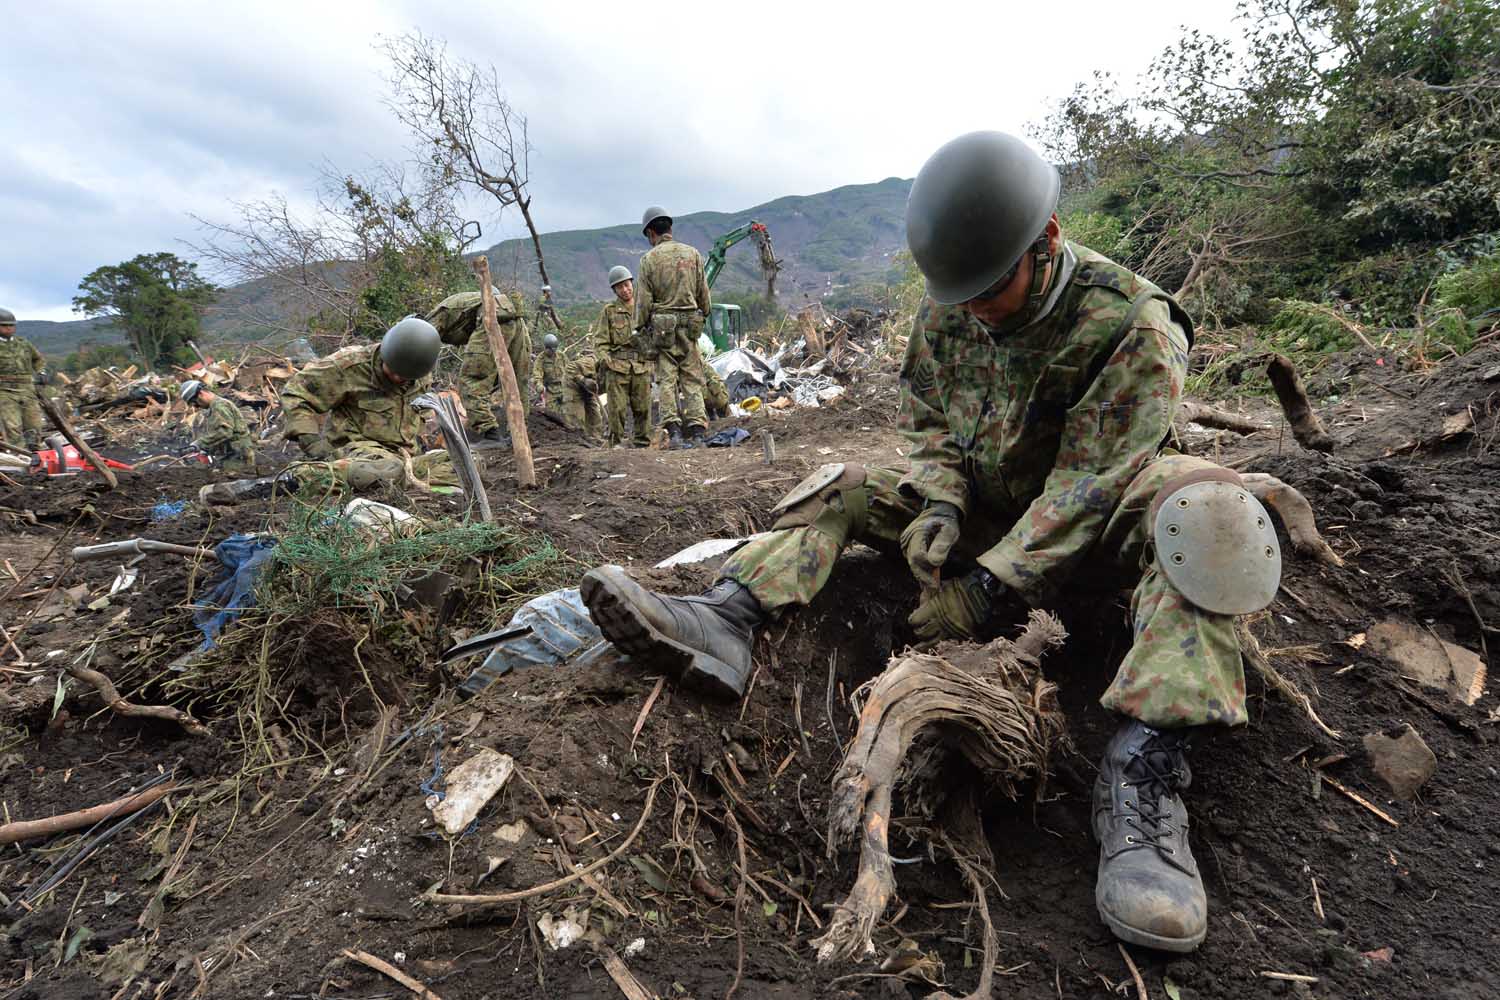 Oct. 18, 2013. Ground Self-Defense Force troops search for missing people after a landslide on Oshima Island.